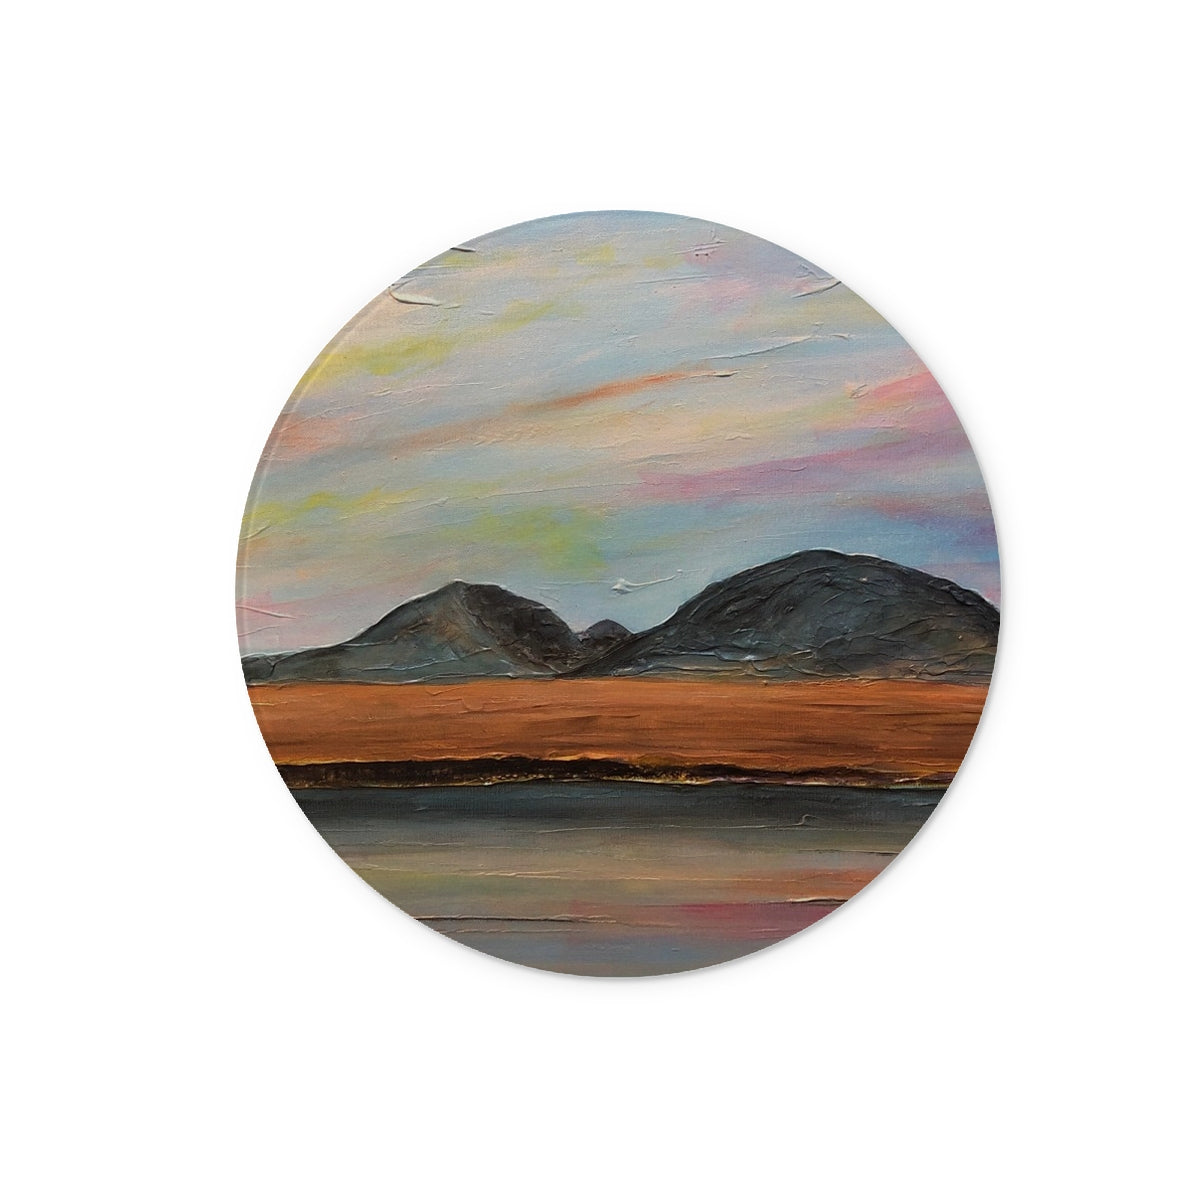 Jura Dawn Art Gifts Glass Chopping Board-Glass Chopping Boards-Hebridean Islands Art Gallery-12" Round-Paintings, Prints, Homeware, Art Gifts From Scotland By Scottish Artist Kevin Hunter